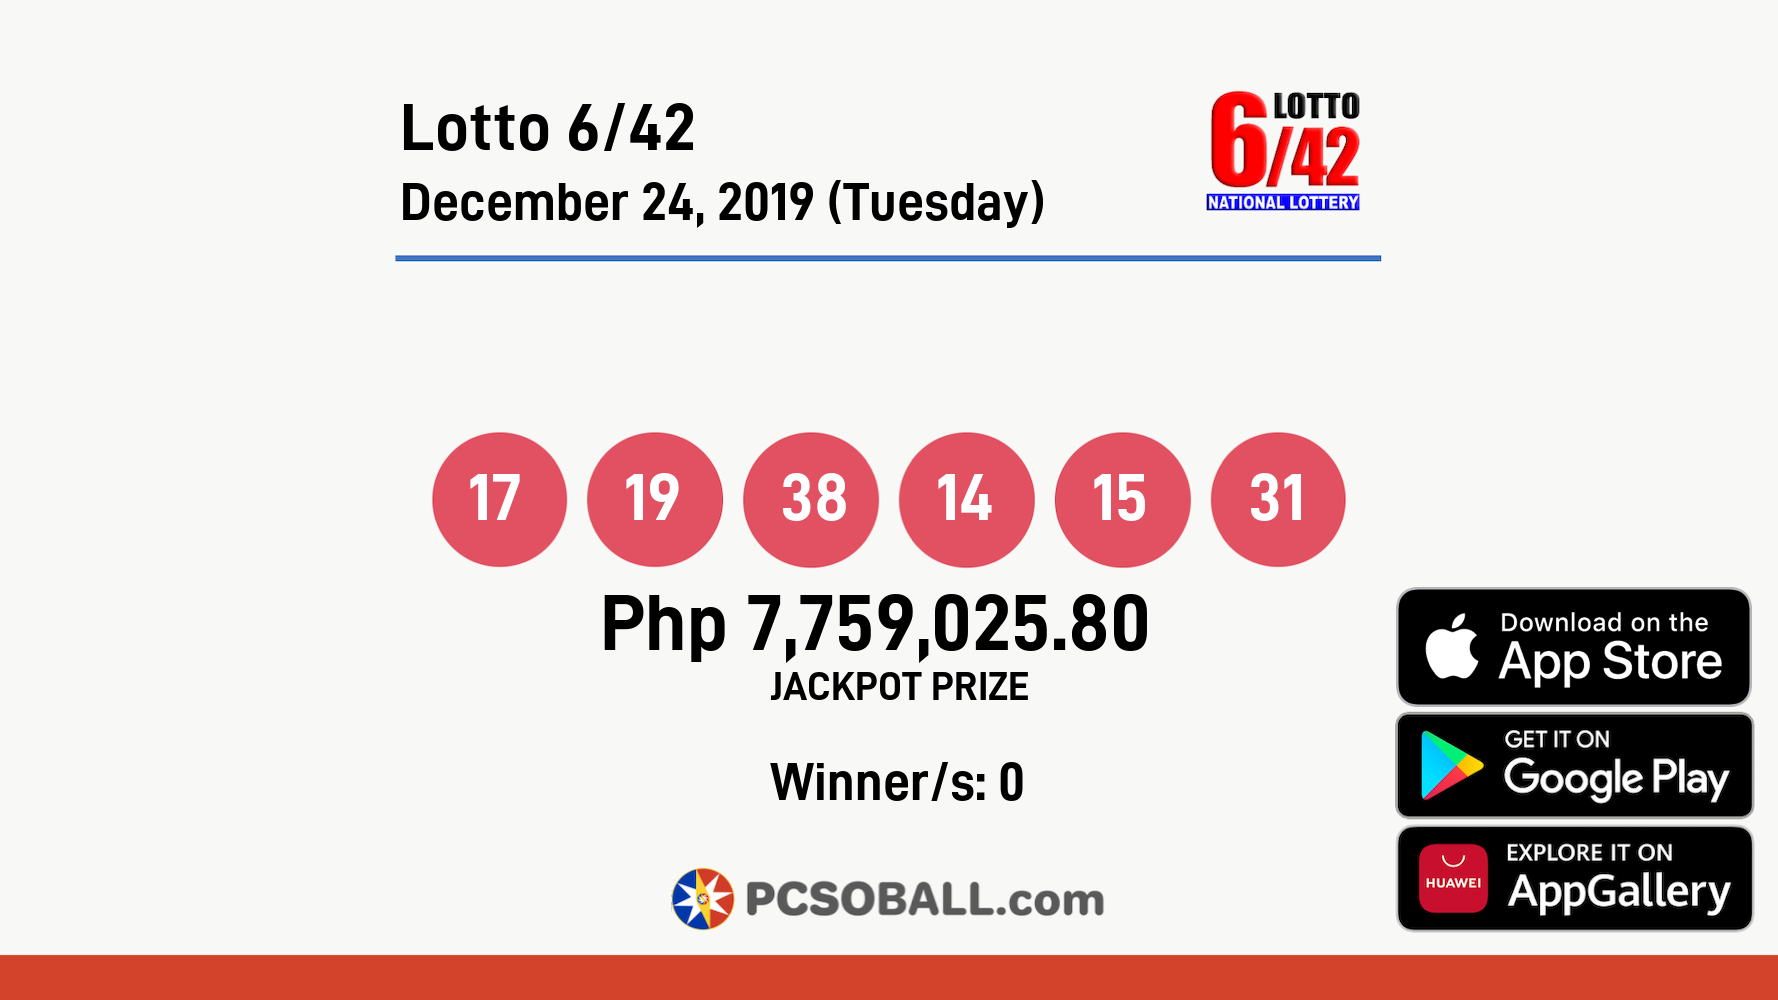 Lotto 6/42 December 24, 2019 (Tuesday) Result